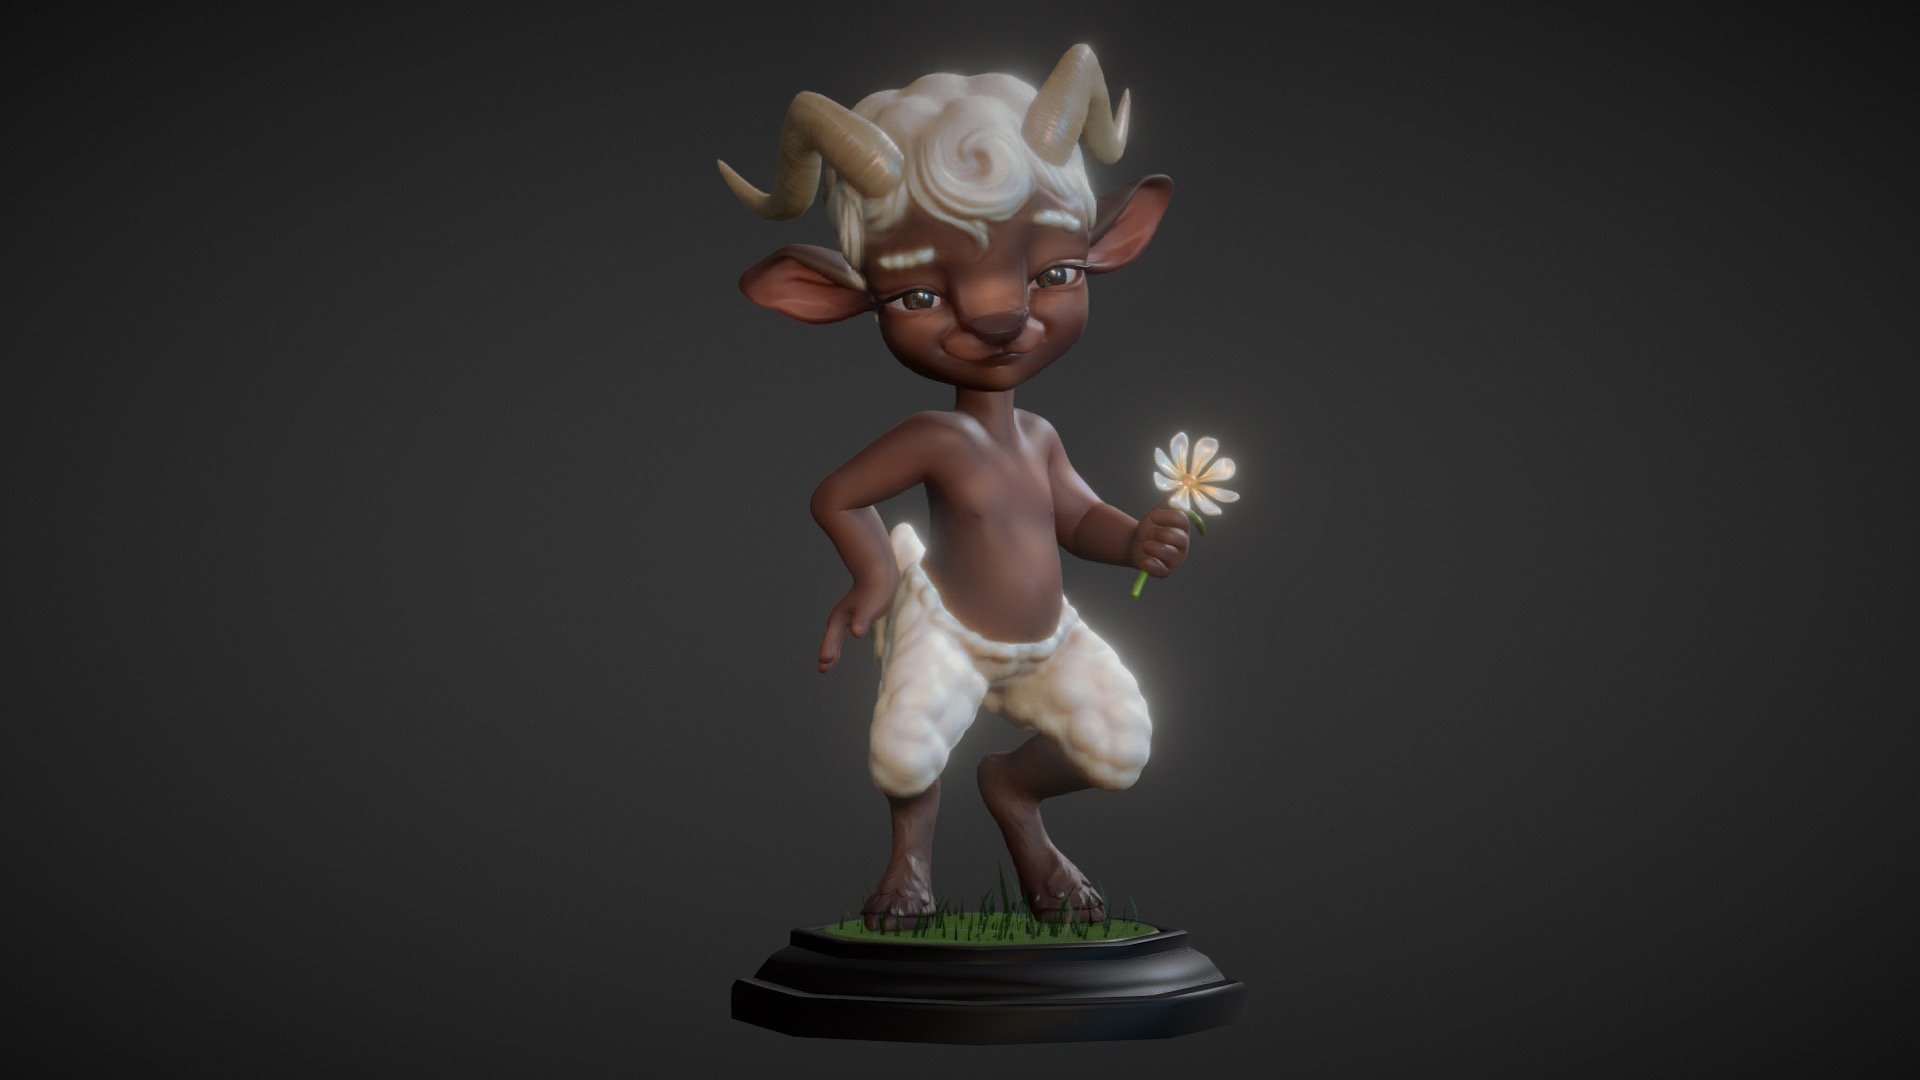 Day 12 of Sculpt January 2018
I thought i’d do a character I had in mind a while back but never got around finishing - little sheep pan :3 - SculptJanuary18 // Pan - 3D model by kasita (@aohmai) 3d model